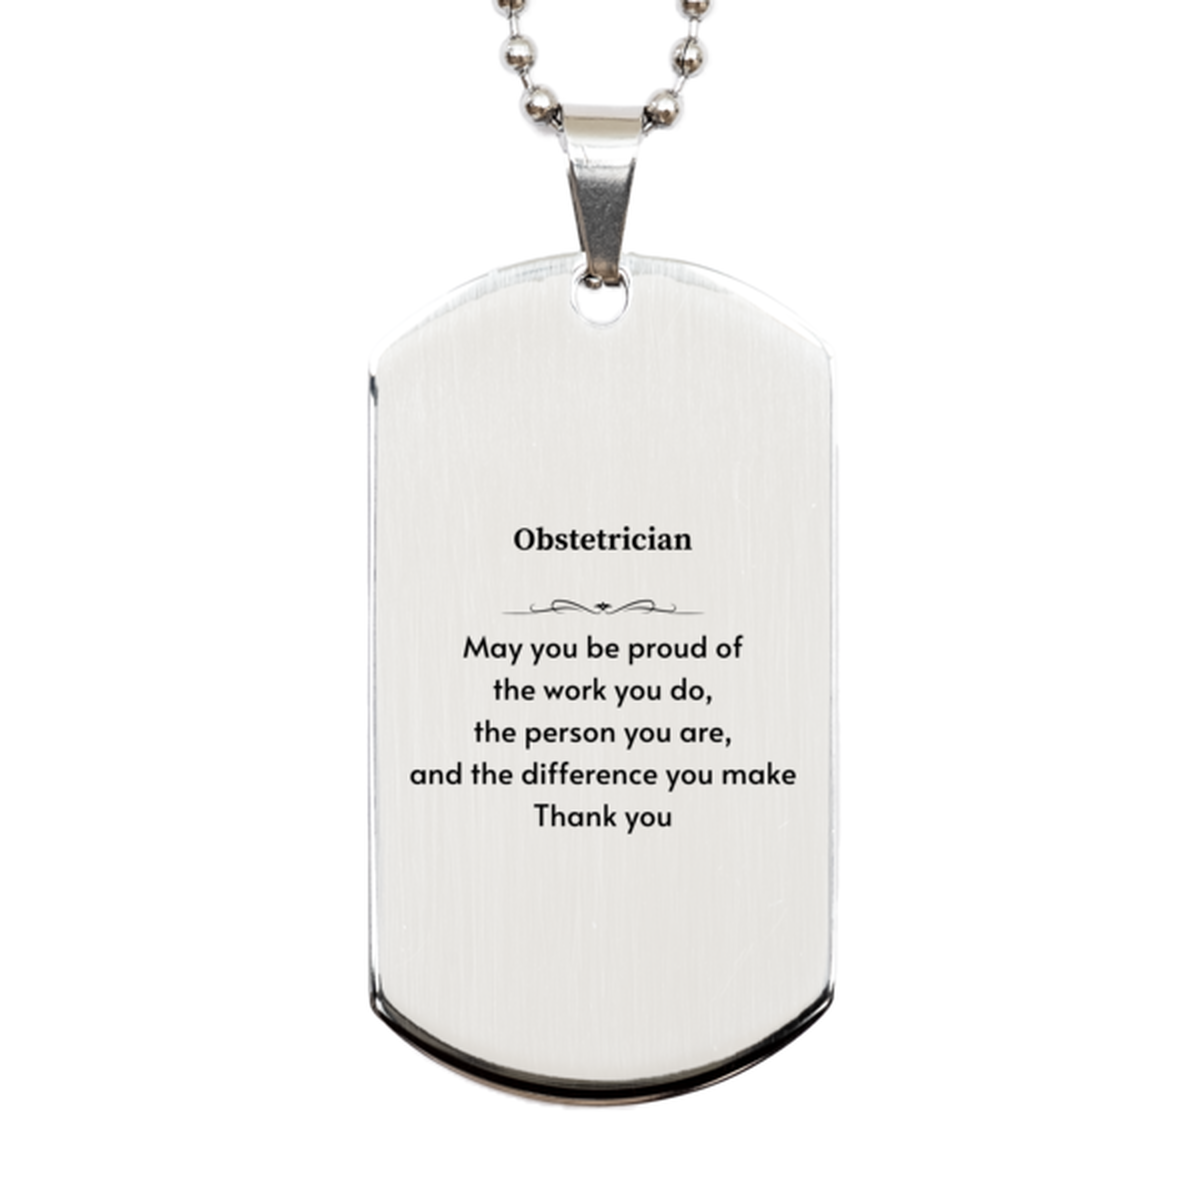 Heartwarming Silver Dog Tag Retirement Coworkers Gifts for Obstetrician, Obstetrician May You be proud of the work you do, the person you are Gifts for Boss Men Women Friends